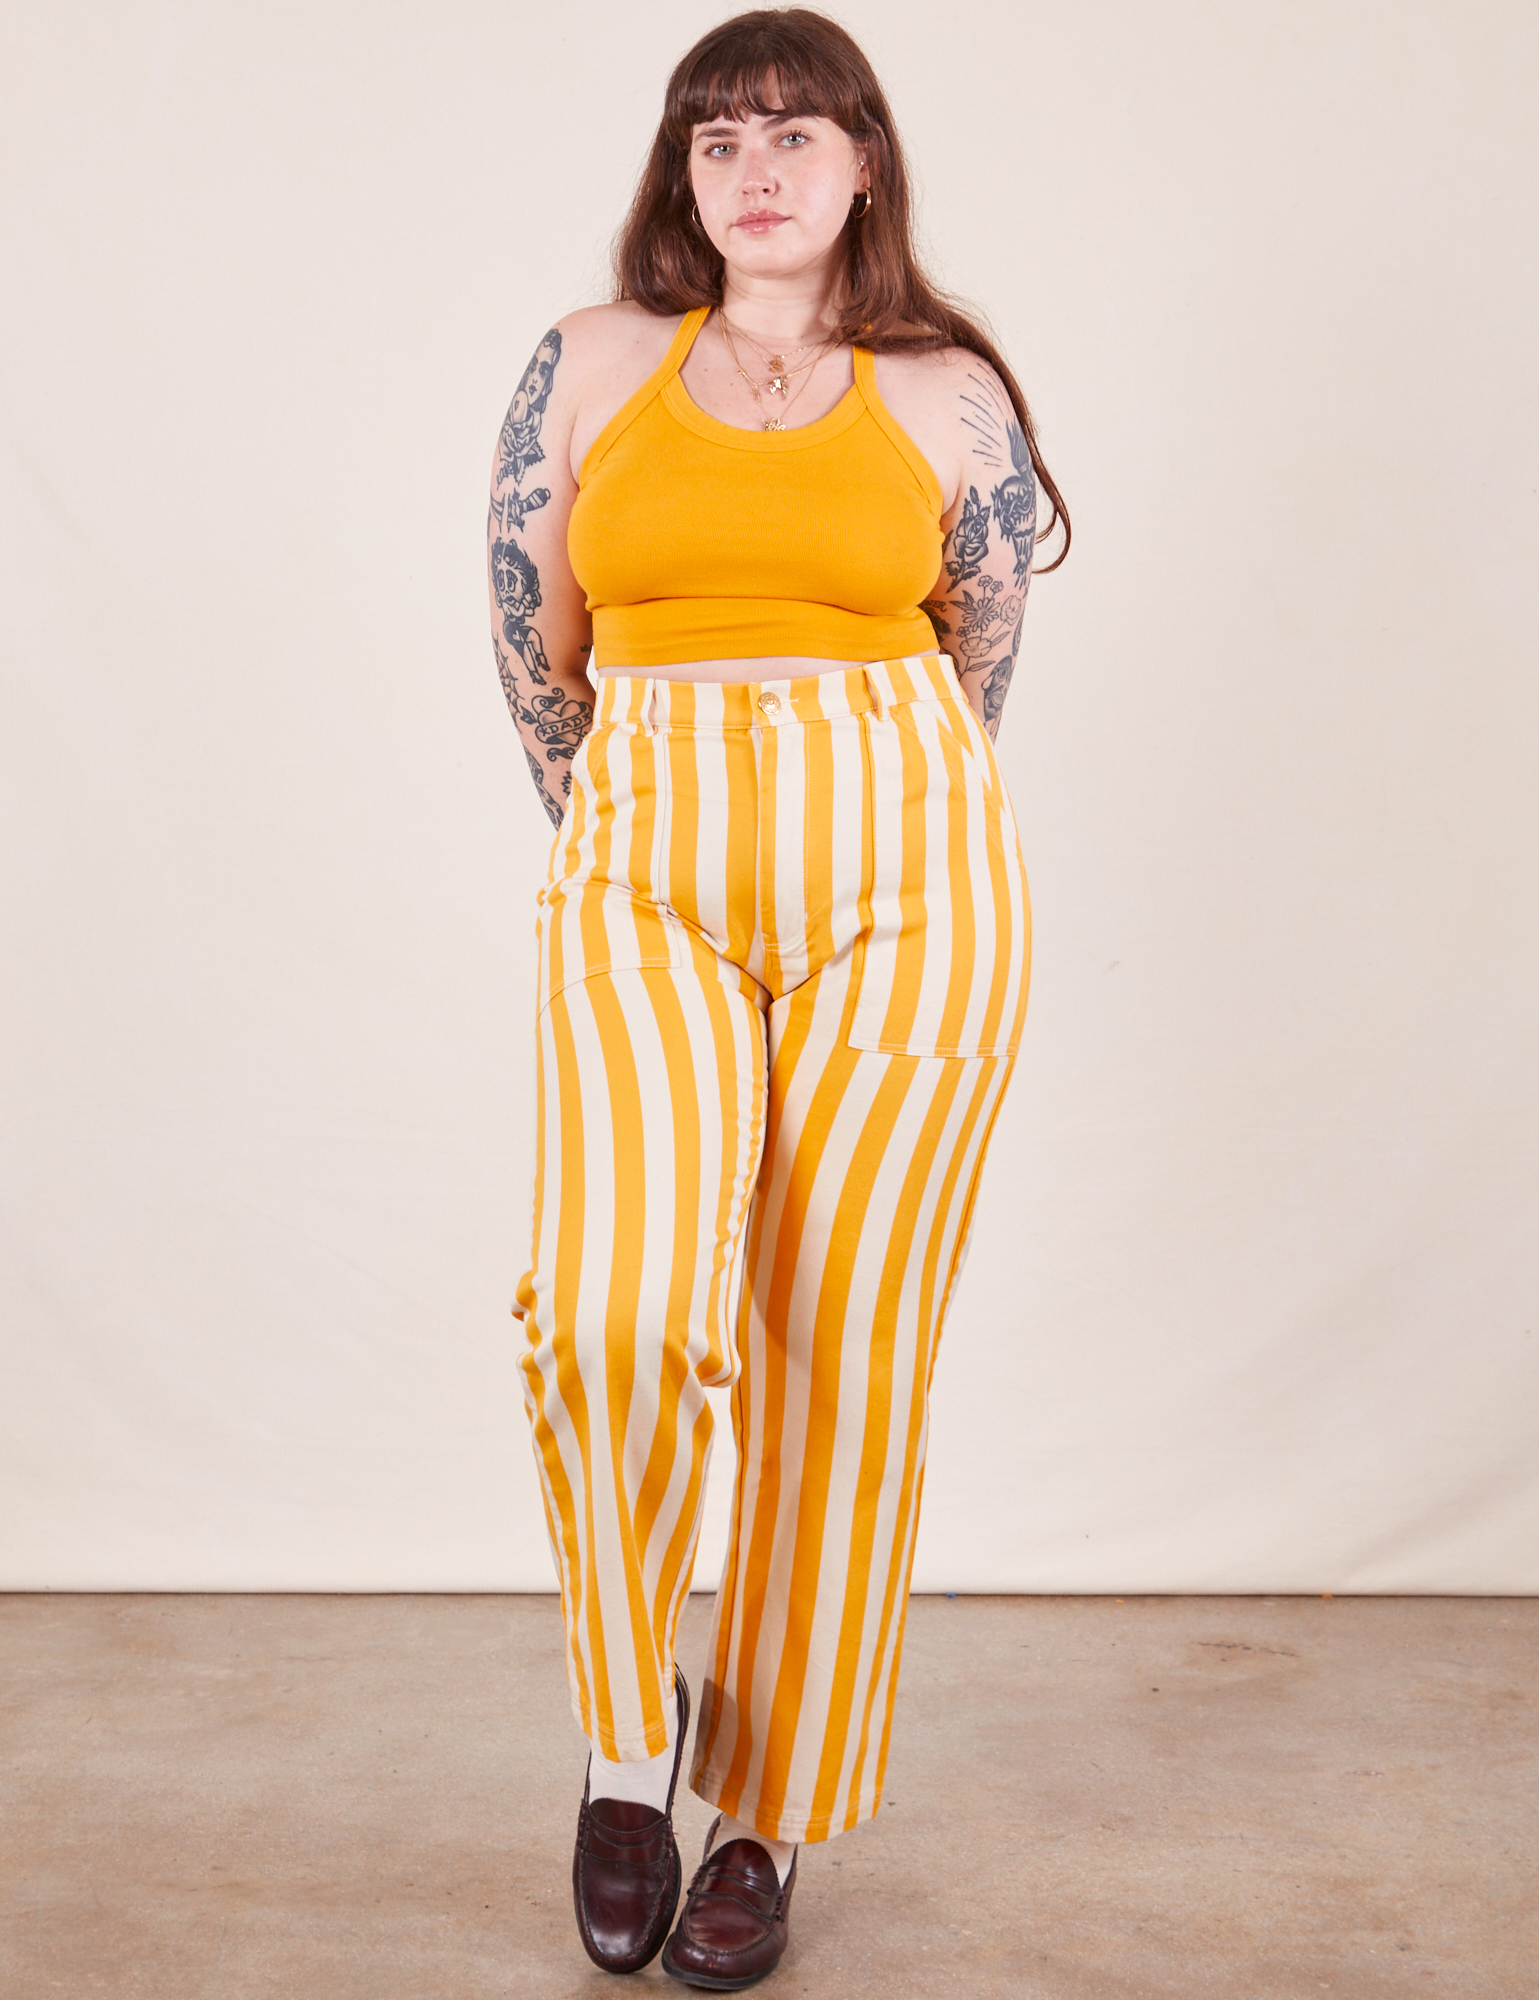 Sydney is 5&#39;9&quot; and wearing L Work Pants in Lemon Stripe paired with mustard yellow Halter Top